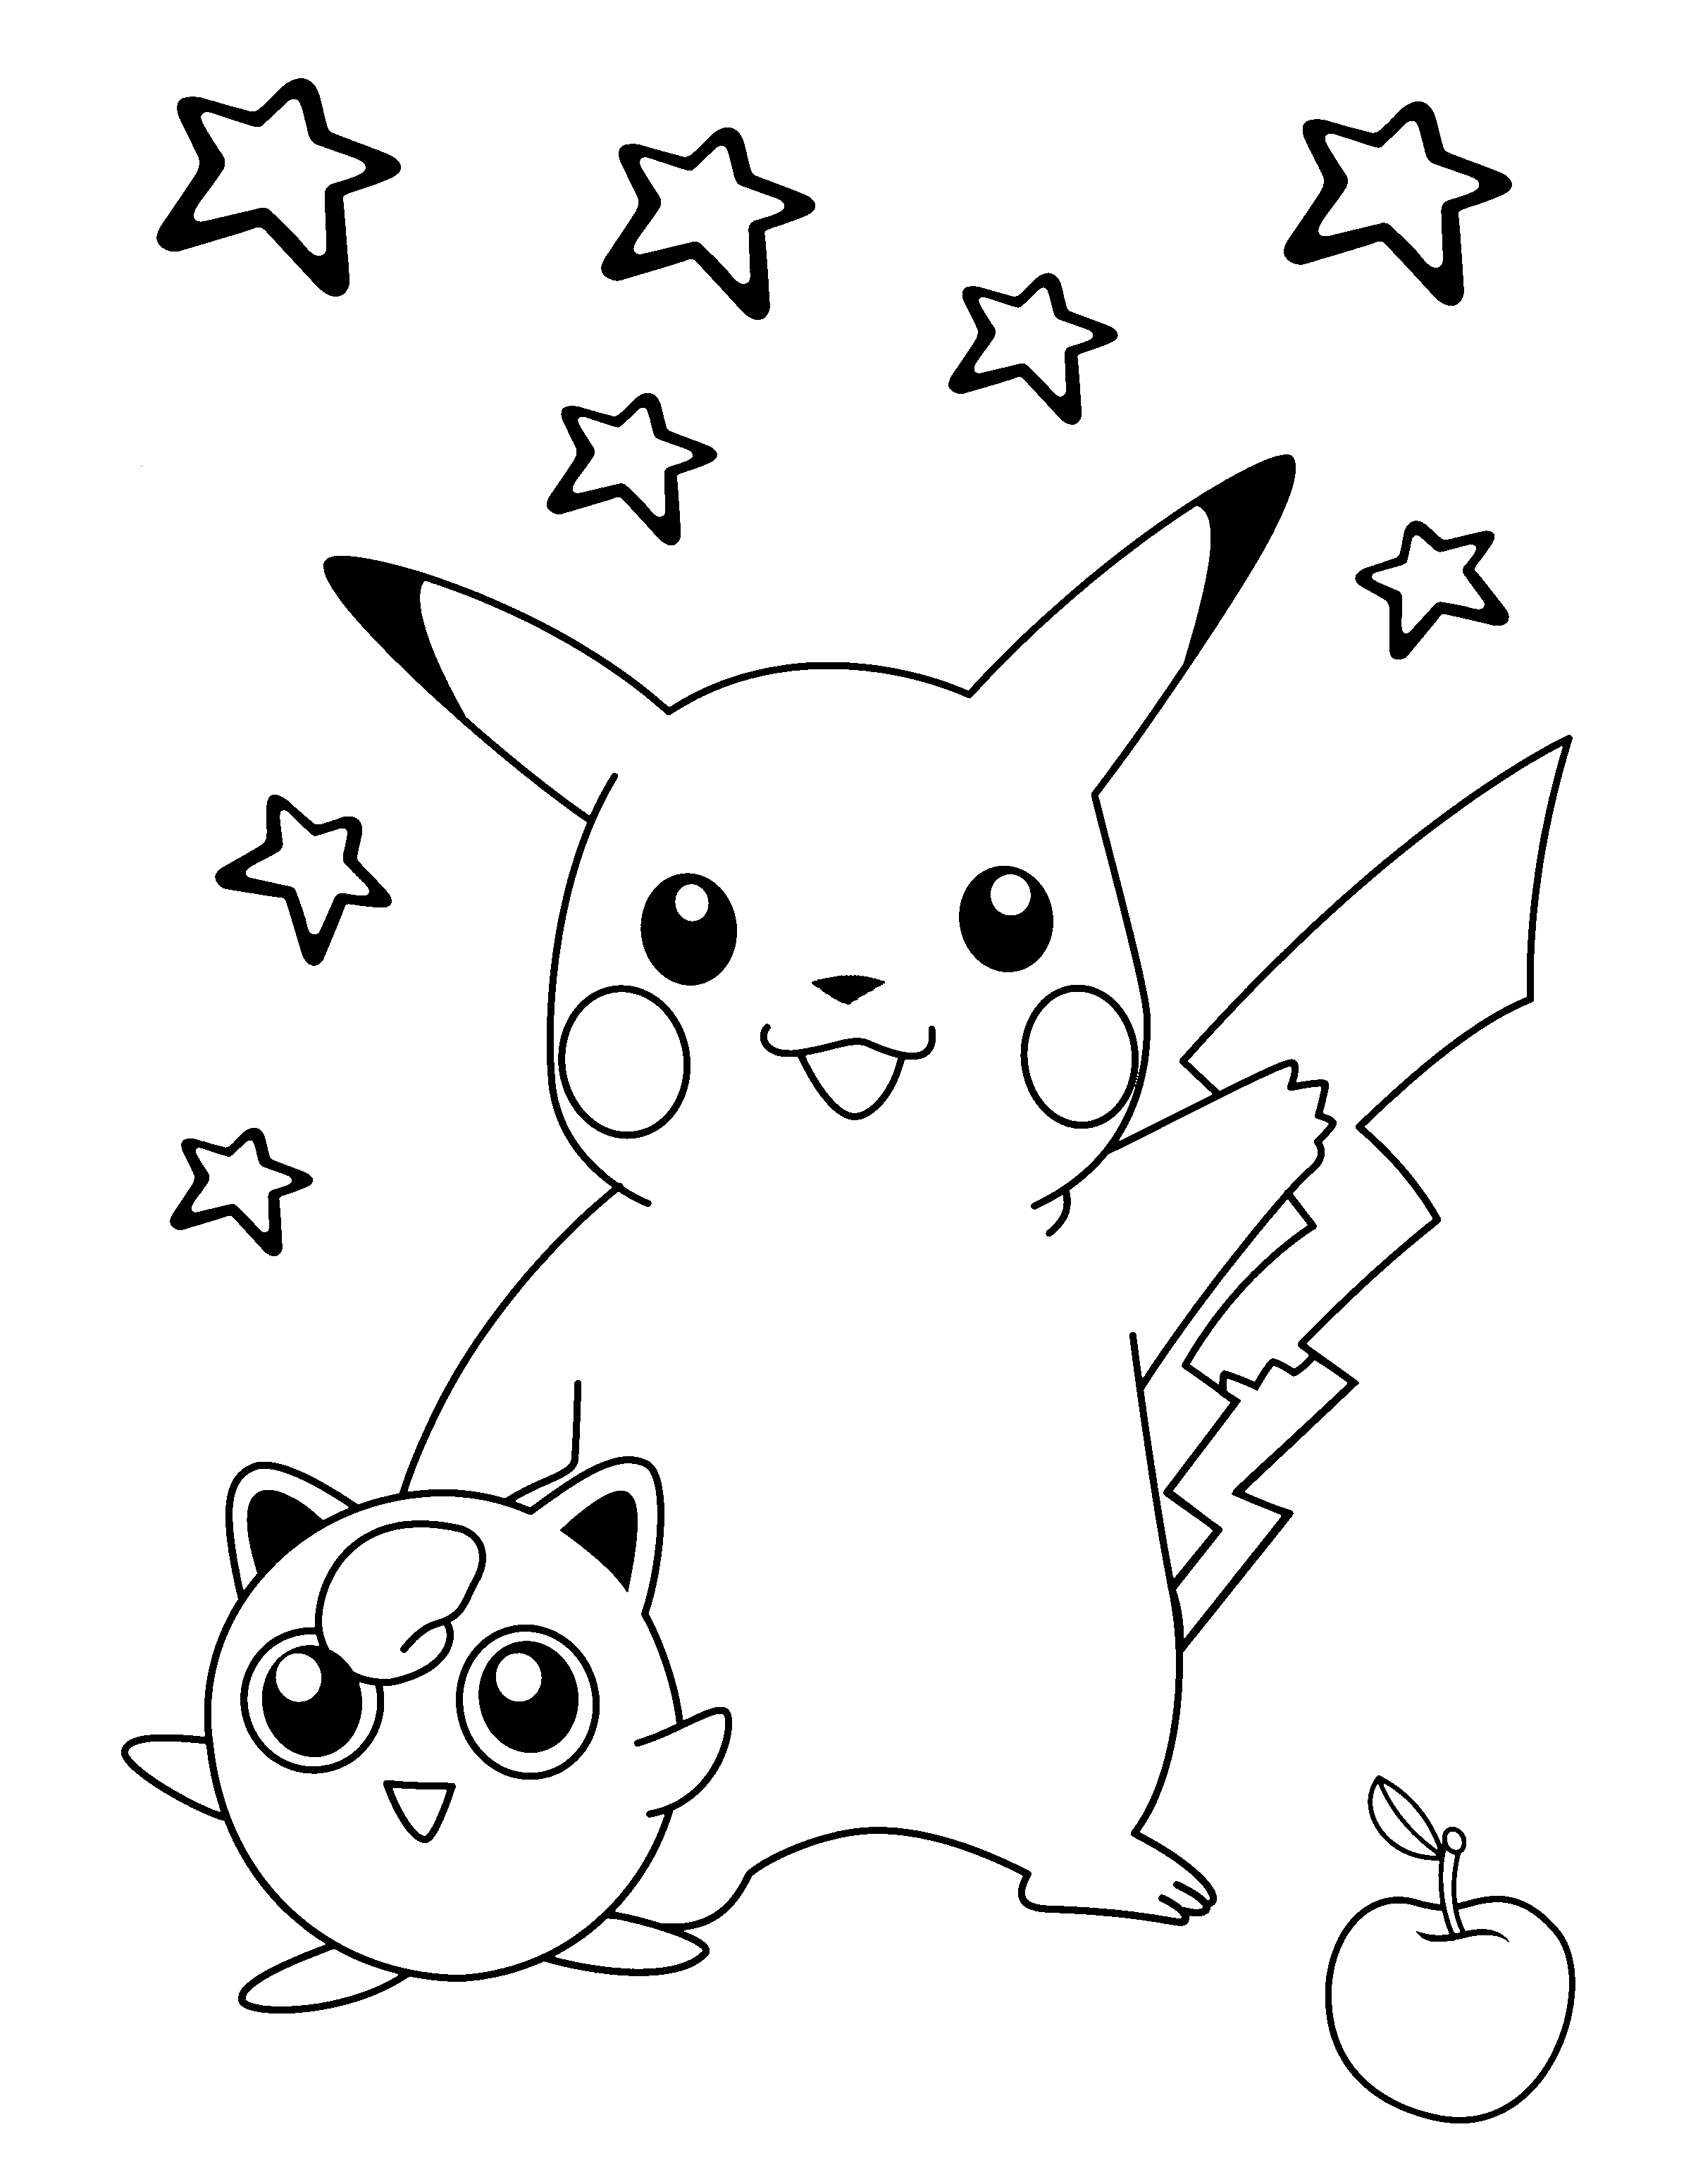 simplepokemon Colouring Pages